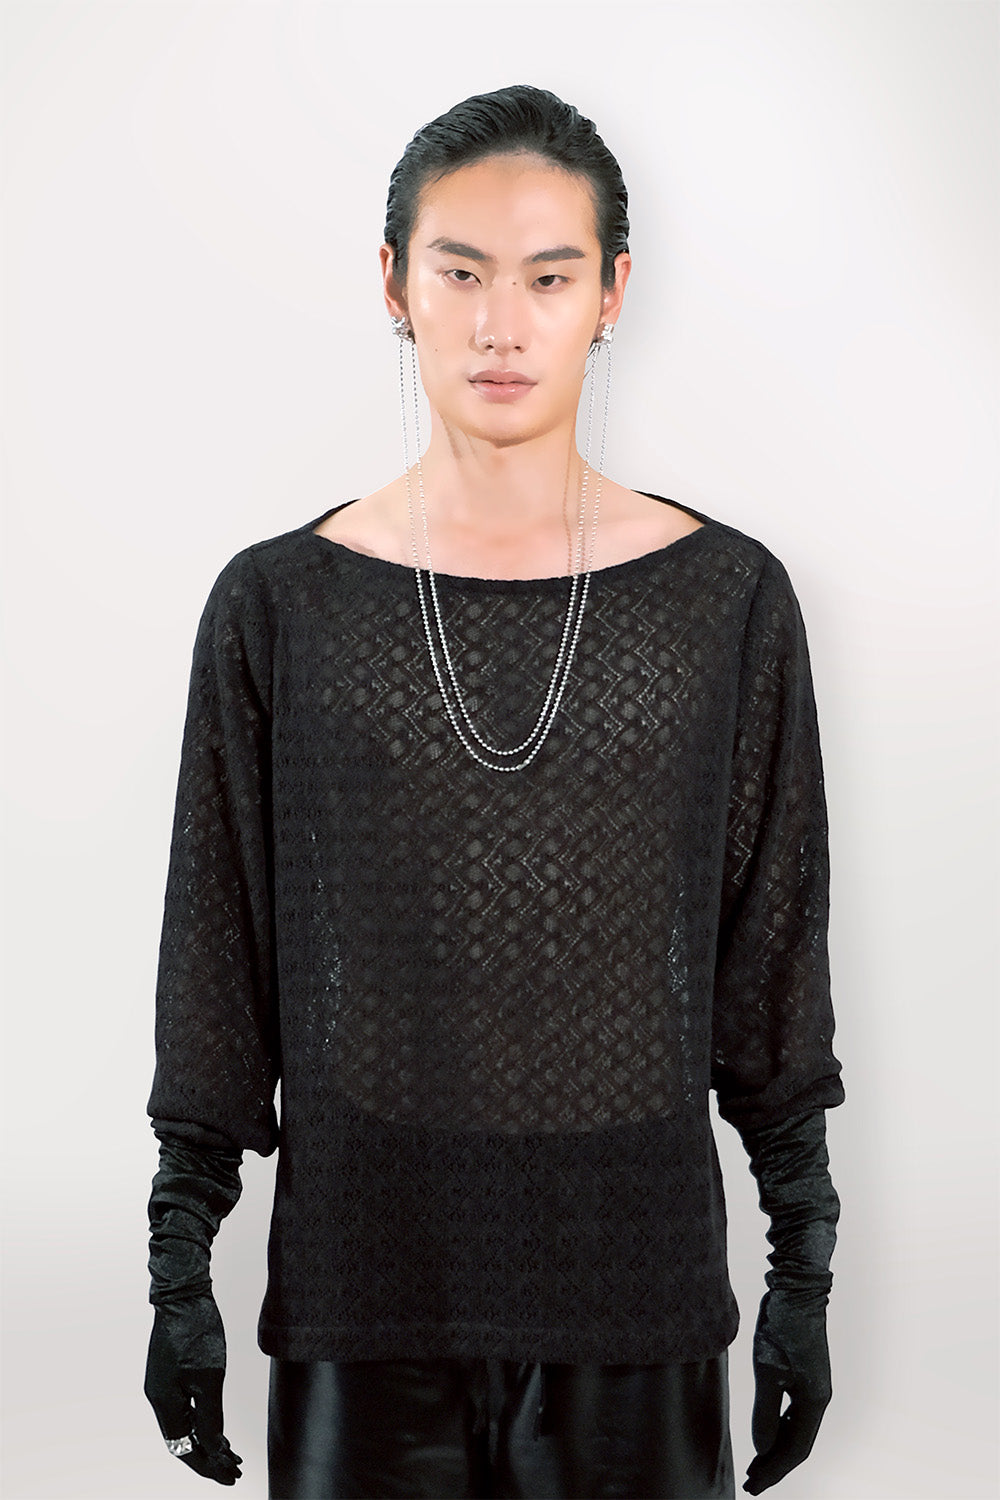 SEANNUNG - MEN - Boat Collar Lace Top 平領蕾絲上衣 